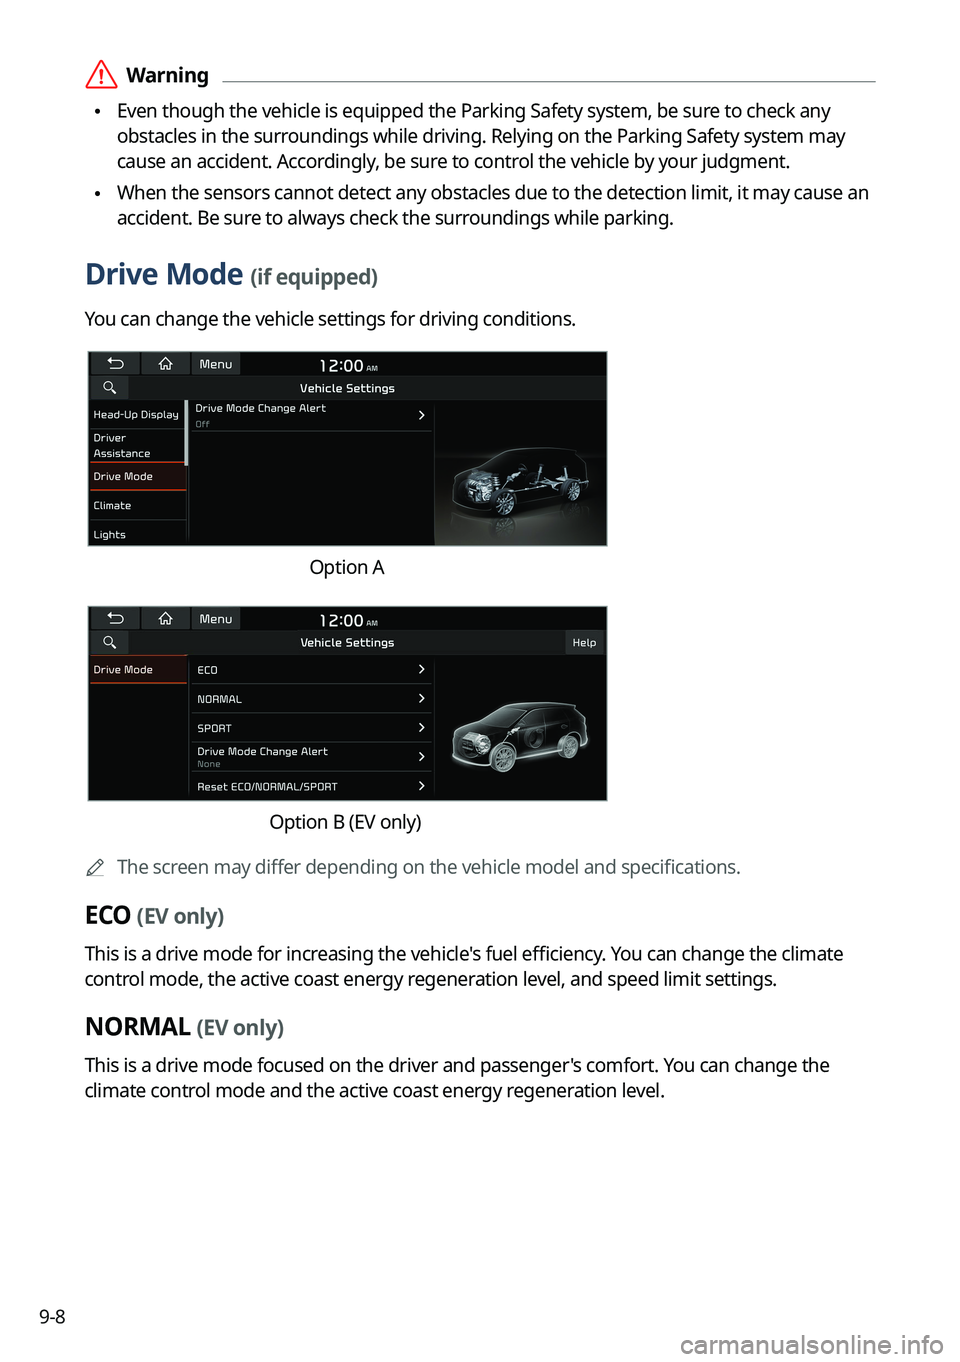 KIA FORTE 2023  Navigation System Quick Reference Guide 9-8
 ÝWarning
 •Even though the vehicle is equipped the Parking Safety system, be sure to check any 
obstacles in the surroundings while driving. Relying on the Parking Safety system may 
cause an 